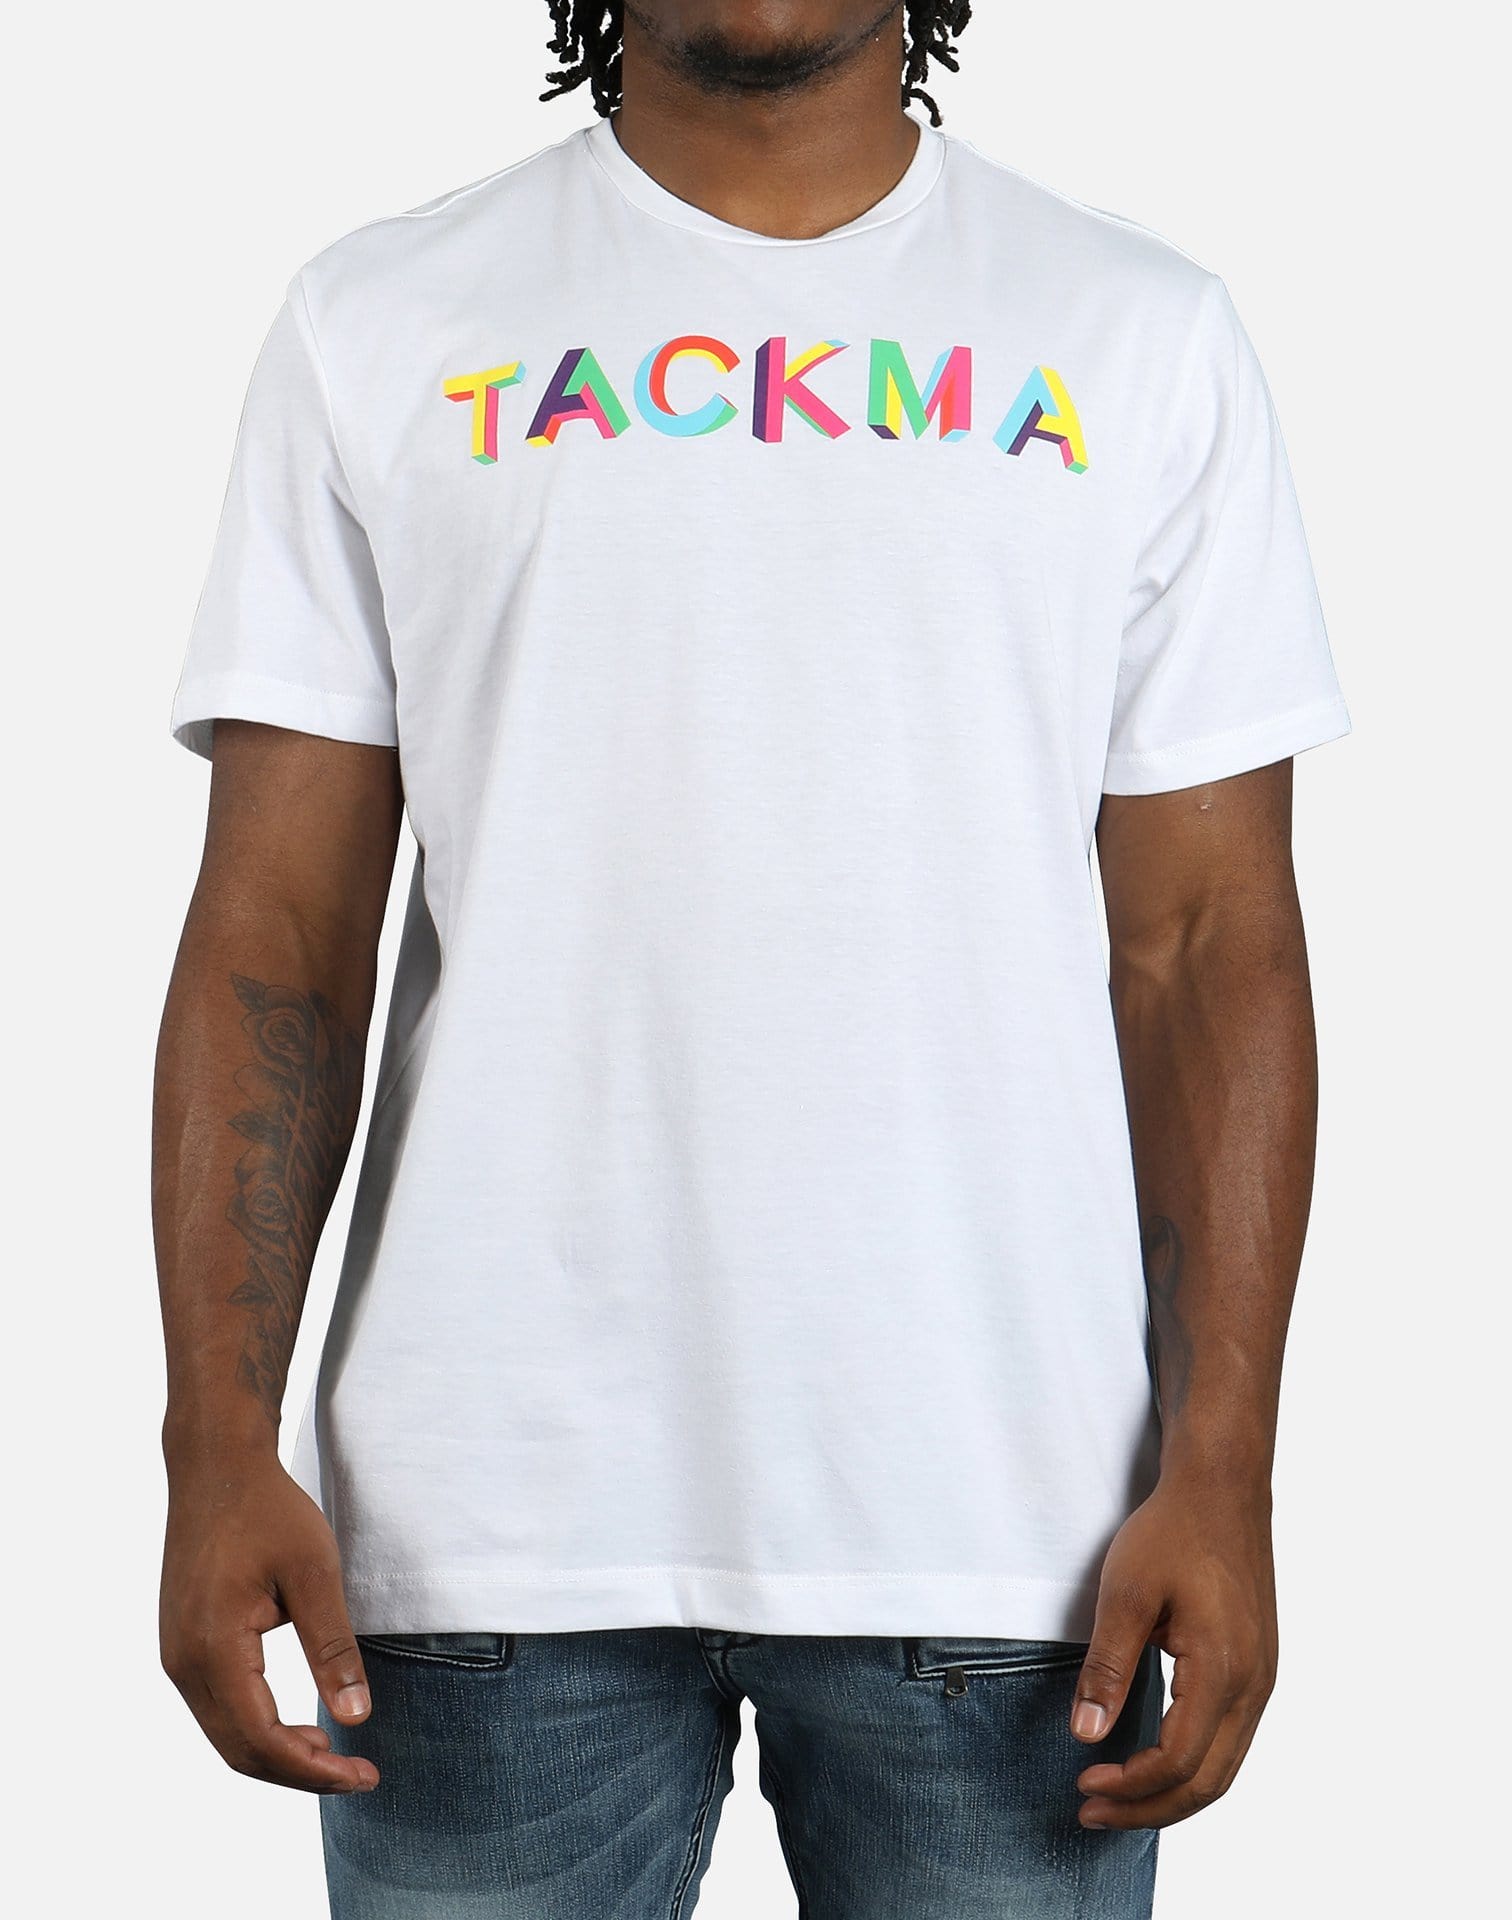 Tackma We Are One Tee (True Colors)